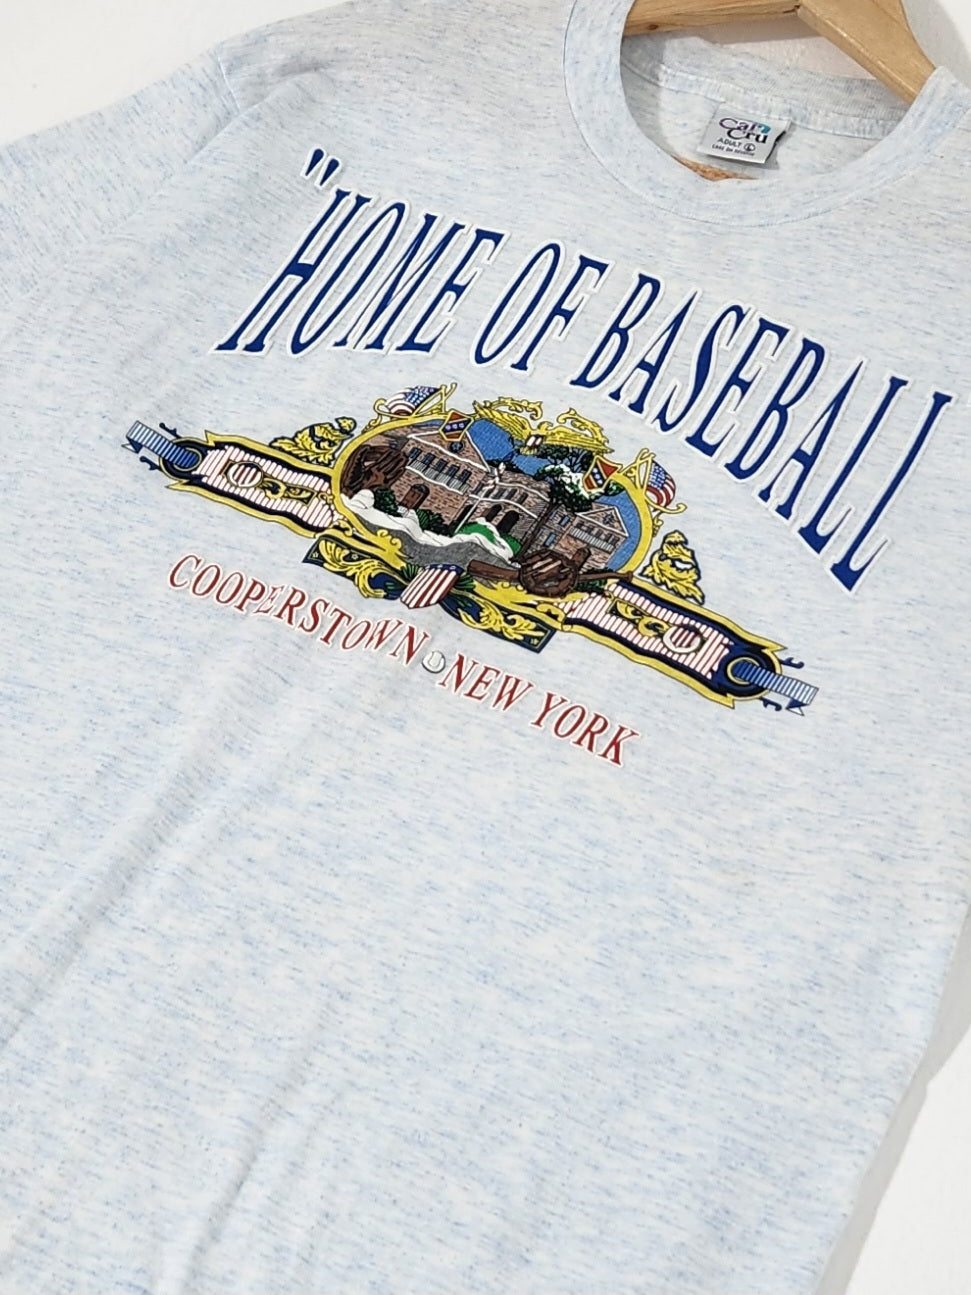 Vintage 1990's Home of Baseball Cooperstown New York T-Shirt Sz. L